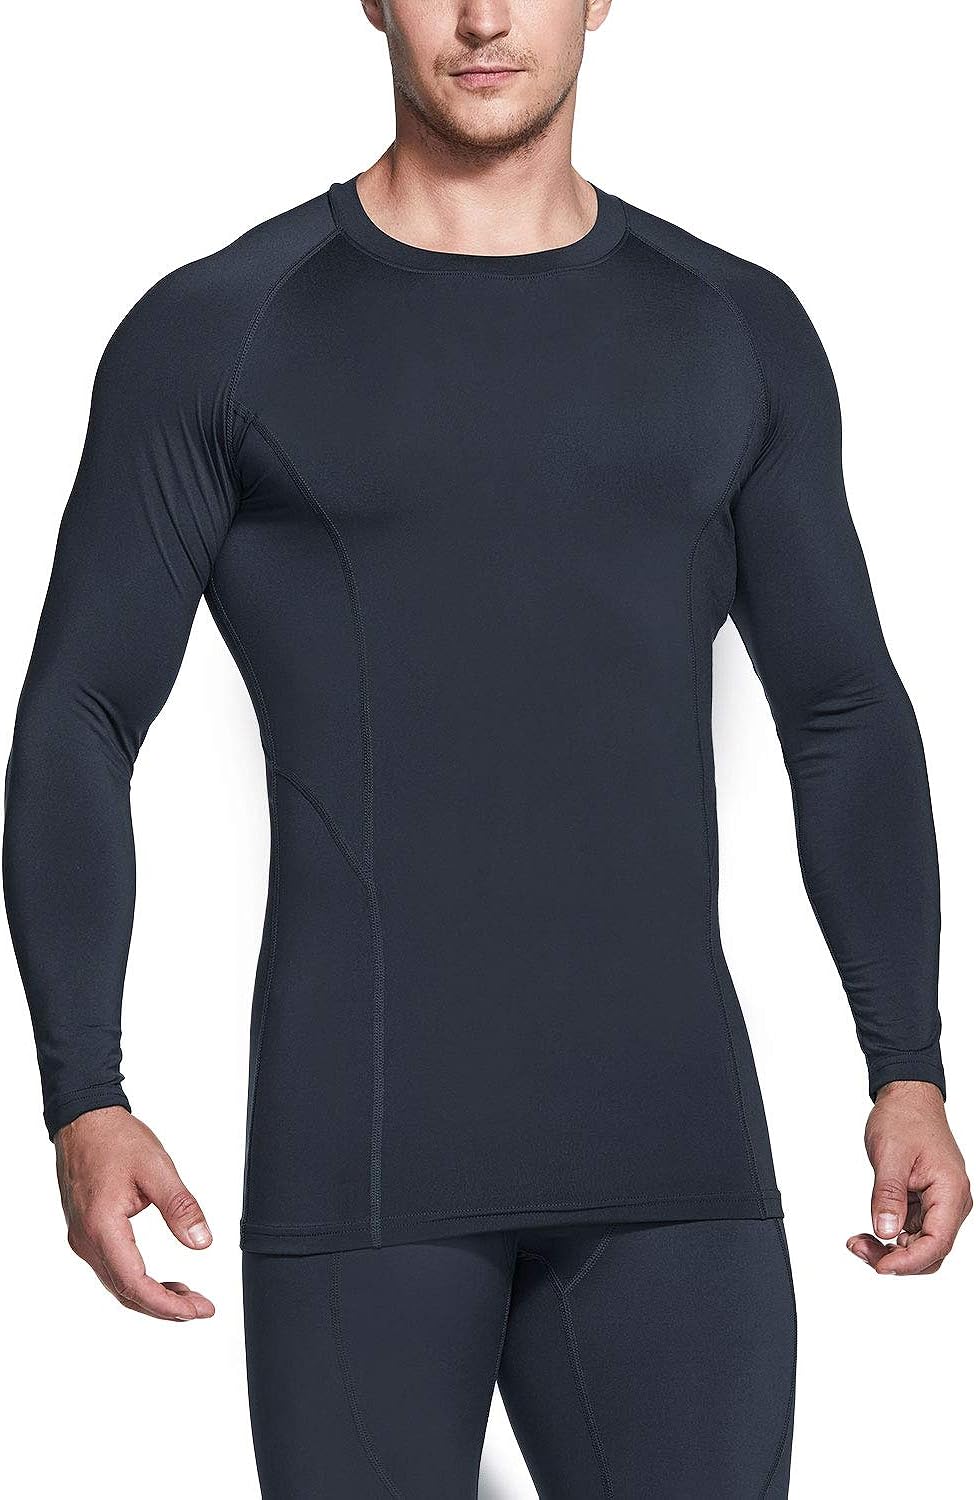 Mens Thermal Winter Gear Sport Compression Shirt Base Layer Long Sleeve Tops